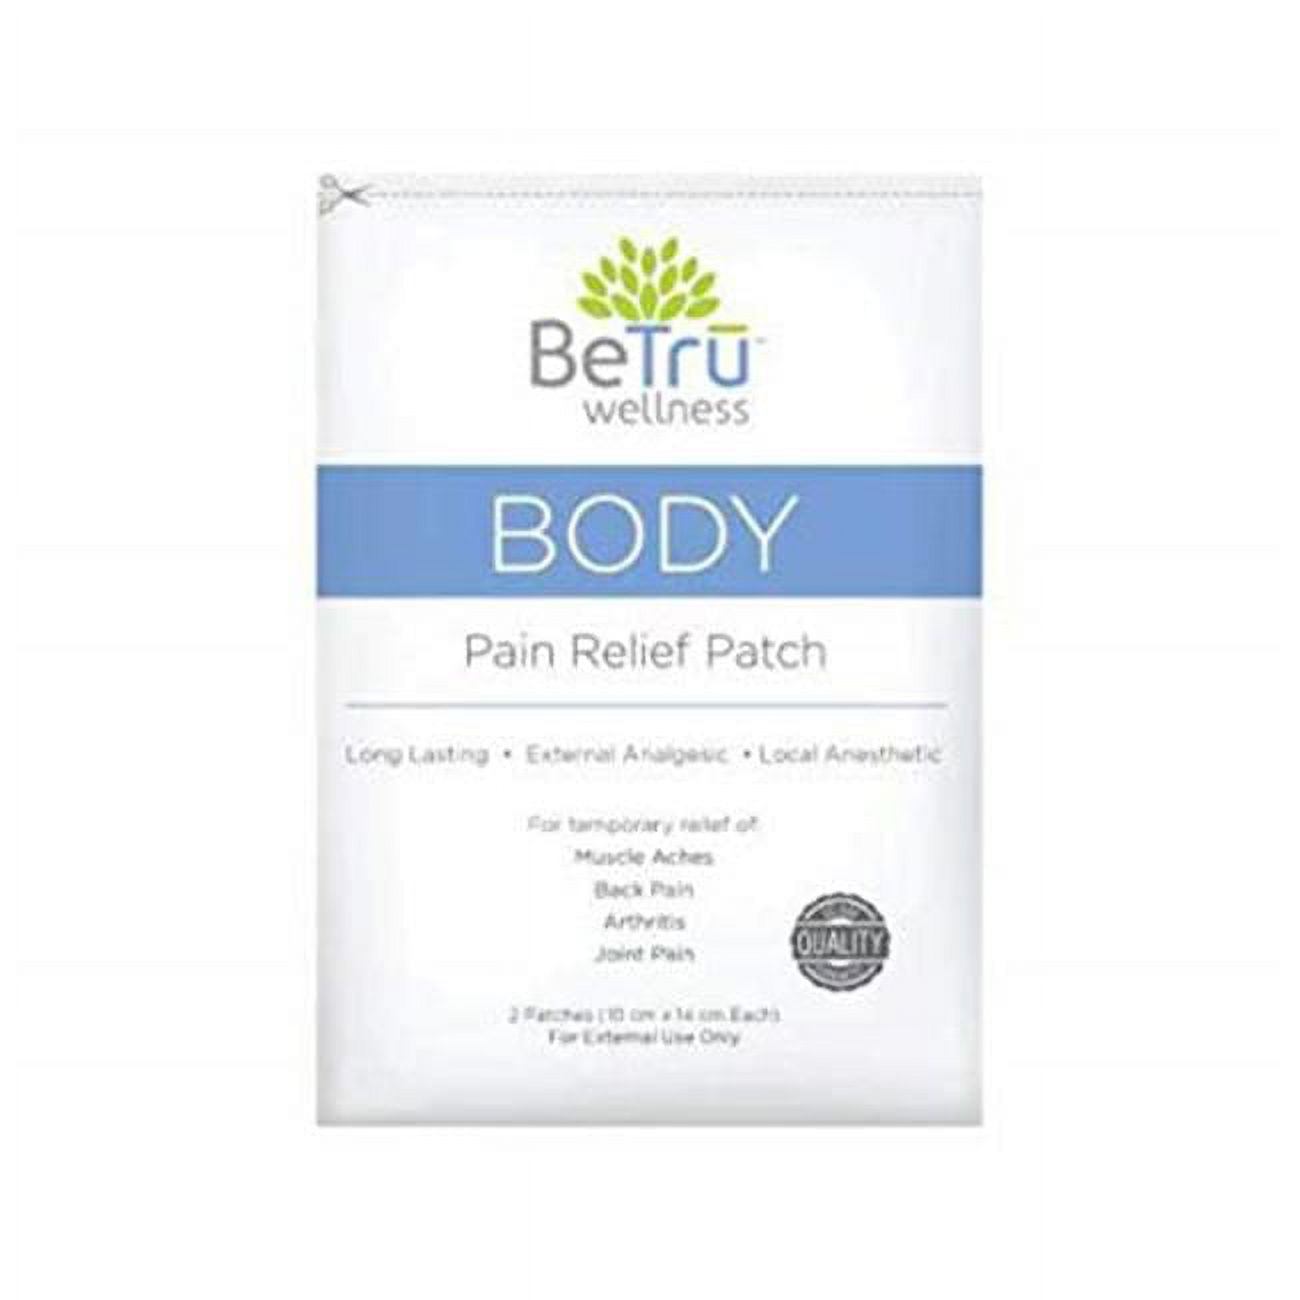 WellPatch Pain Relief - WellPatch patches are safety tested to ensure  worry-free pain relief. Get safe and effective pain relief for less than a  dollar per patch. Available at Walmart.